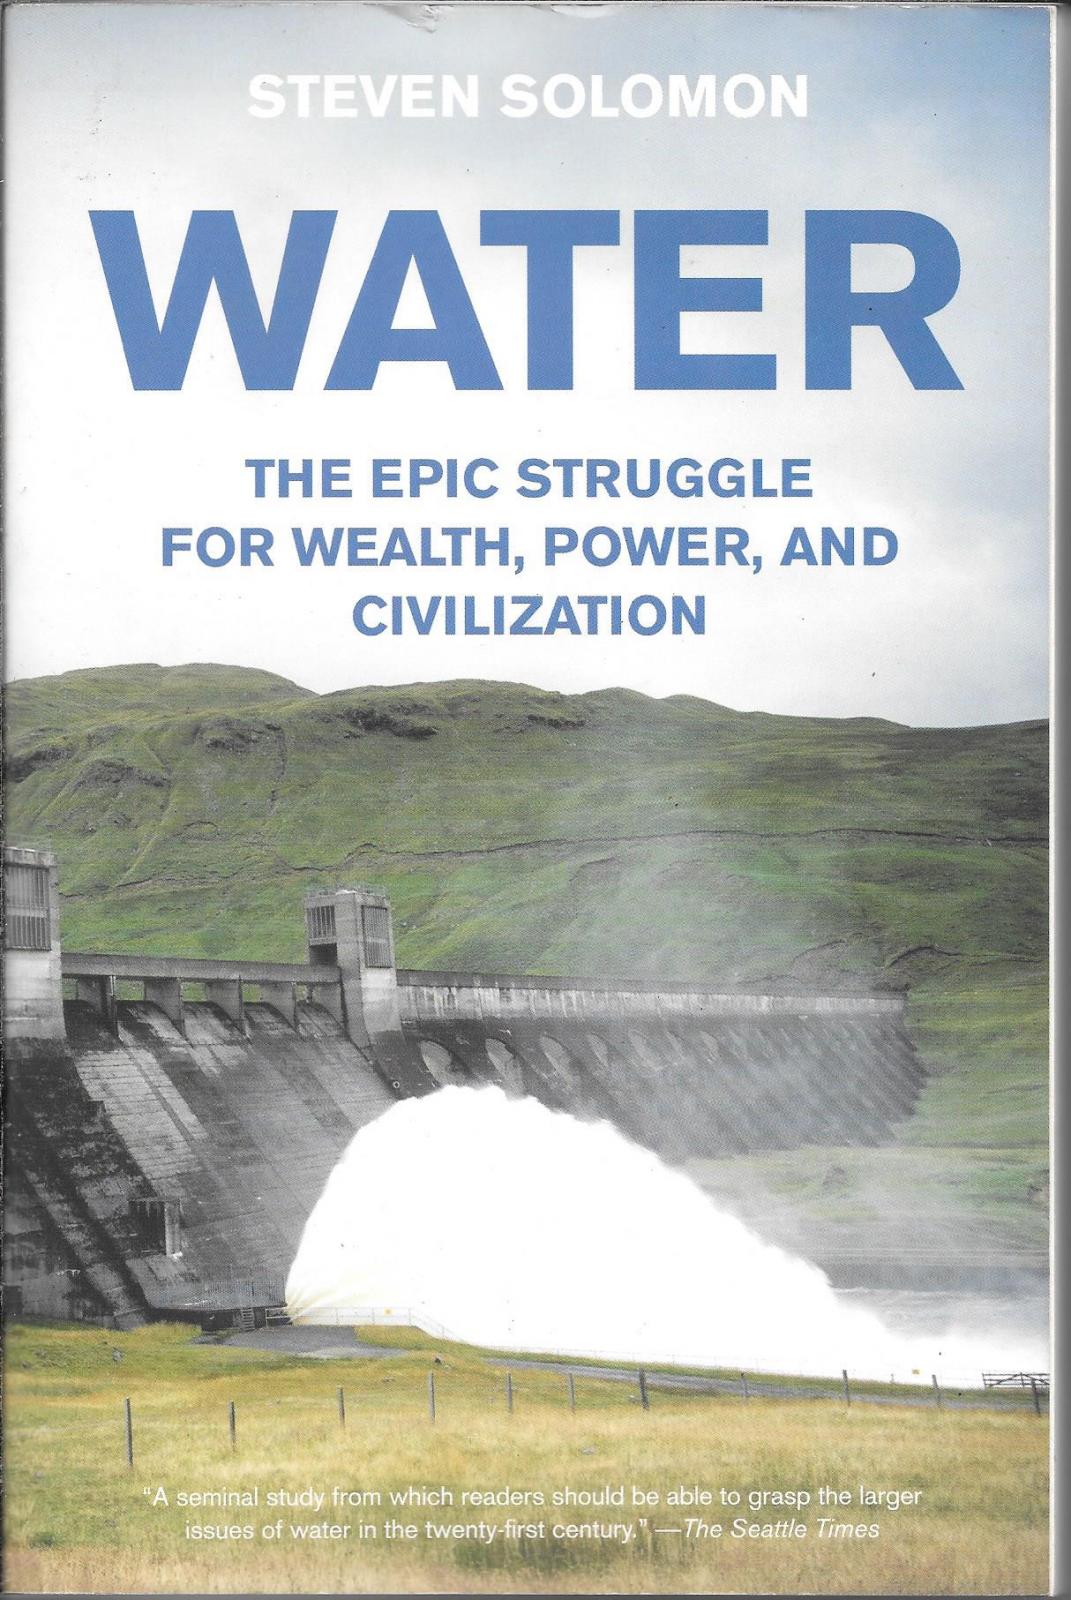 Water - The Epic Struggle for Wealth, Power and Civilization